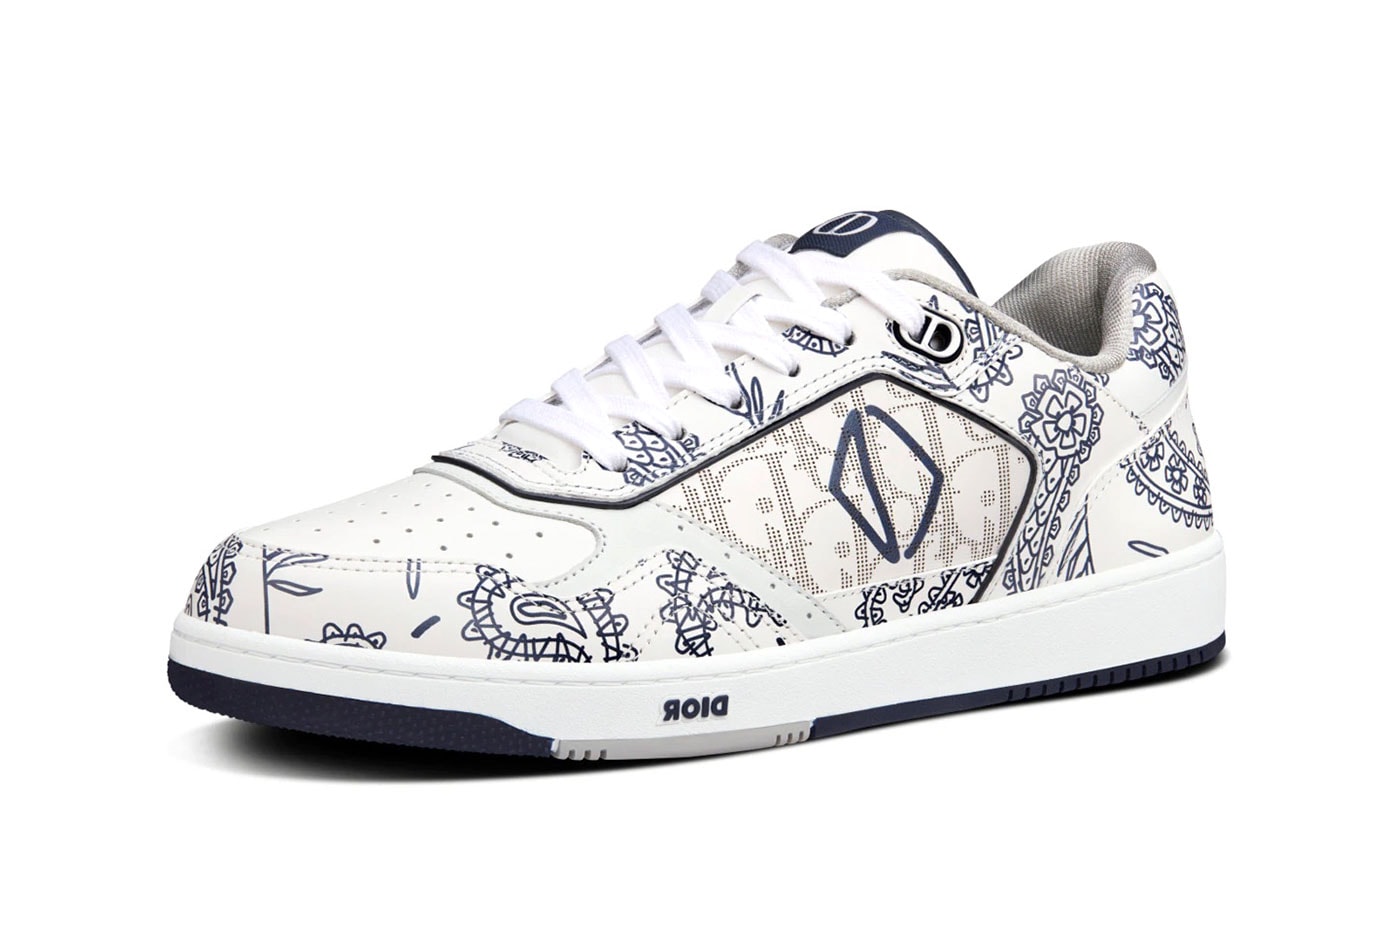 Dior SS22 Paisley Print B27 Low Top Sneakers Release Info White Navy Coffee 3SN272ZOF_H760-b27